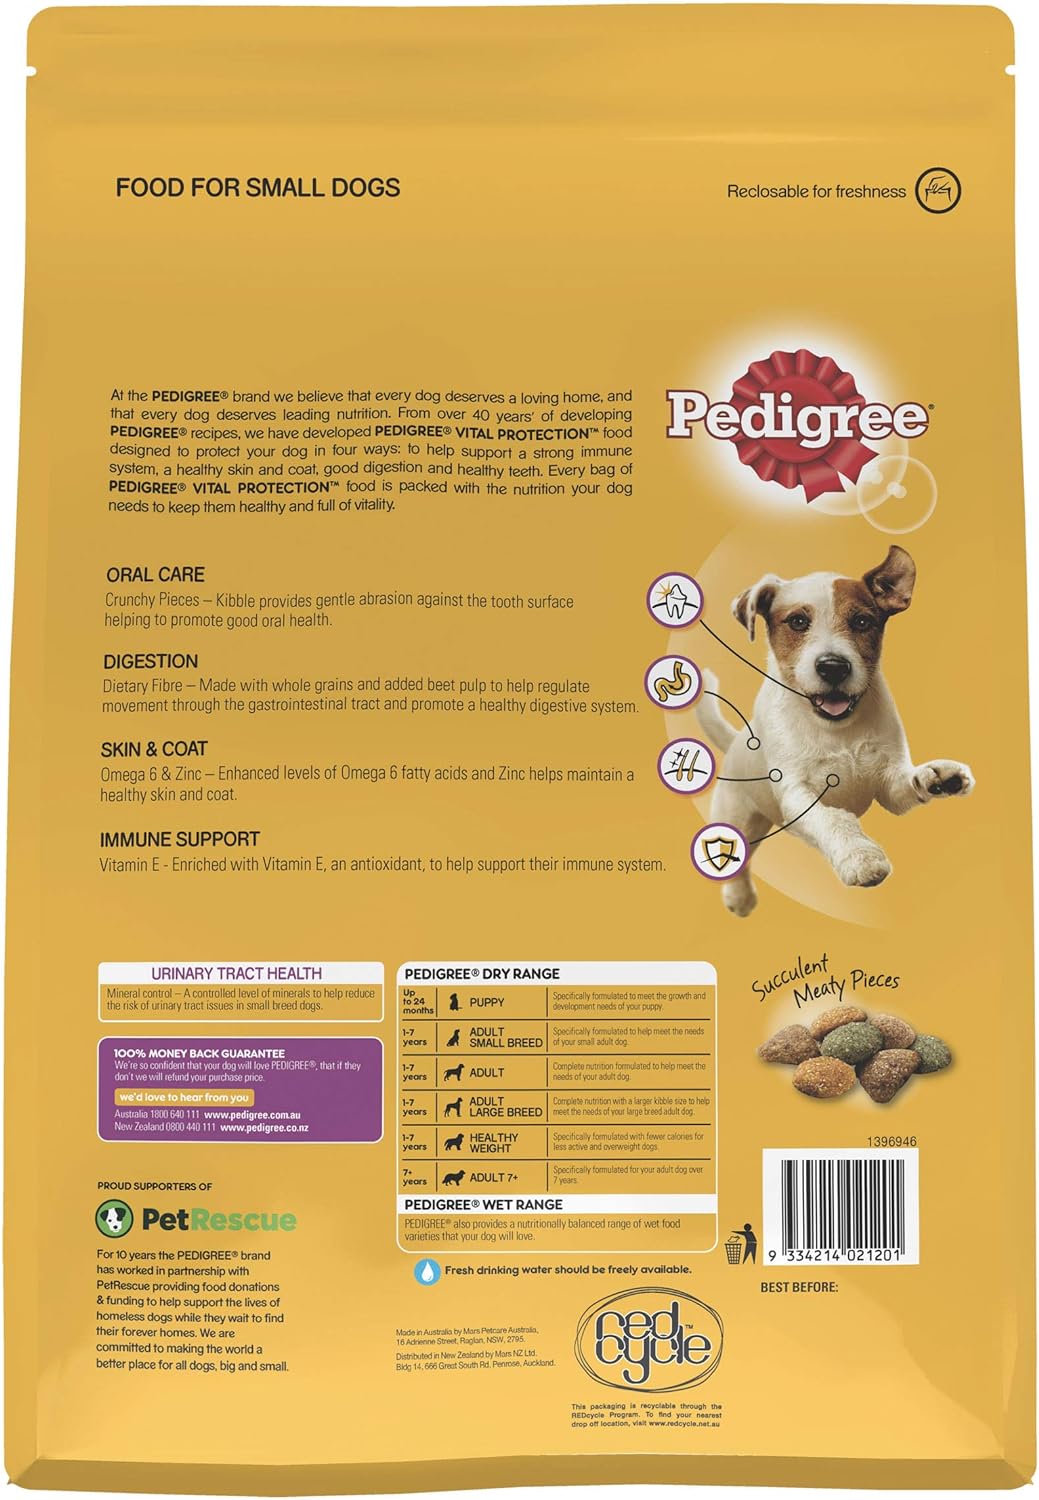 PEDIGREE Small Breed Chicken Dry Dog Food 2.5kg Bag 4 Pack